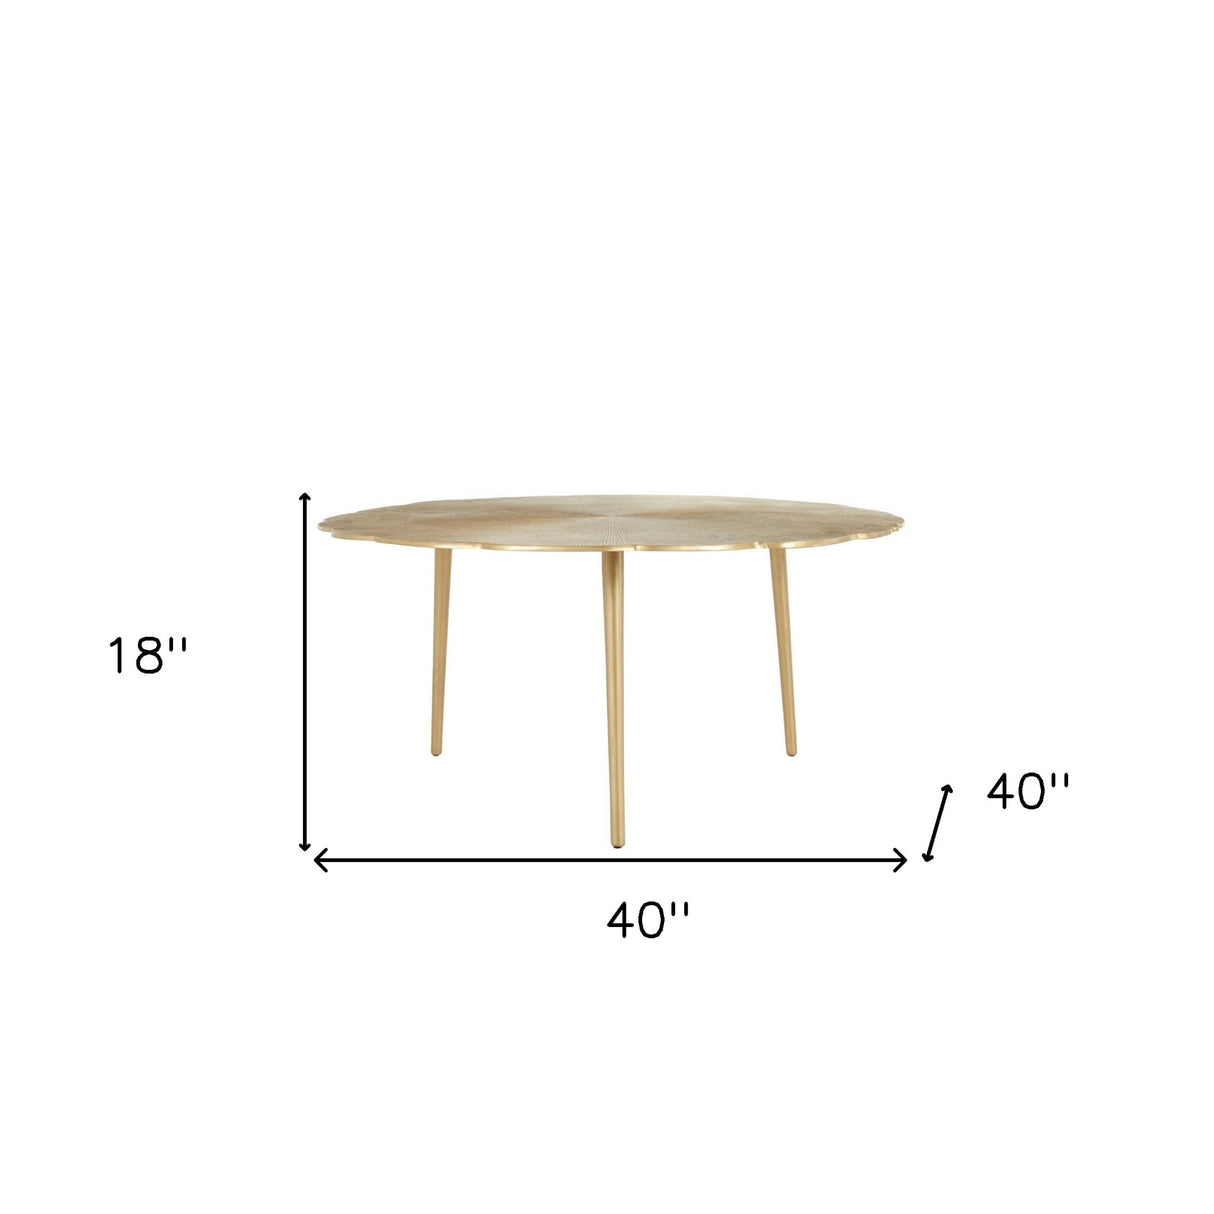 40" Gold Aluminum Round Distressed Coffee Table